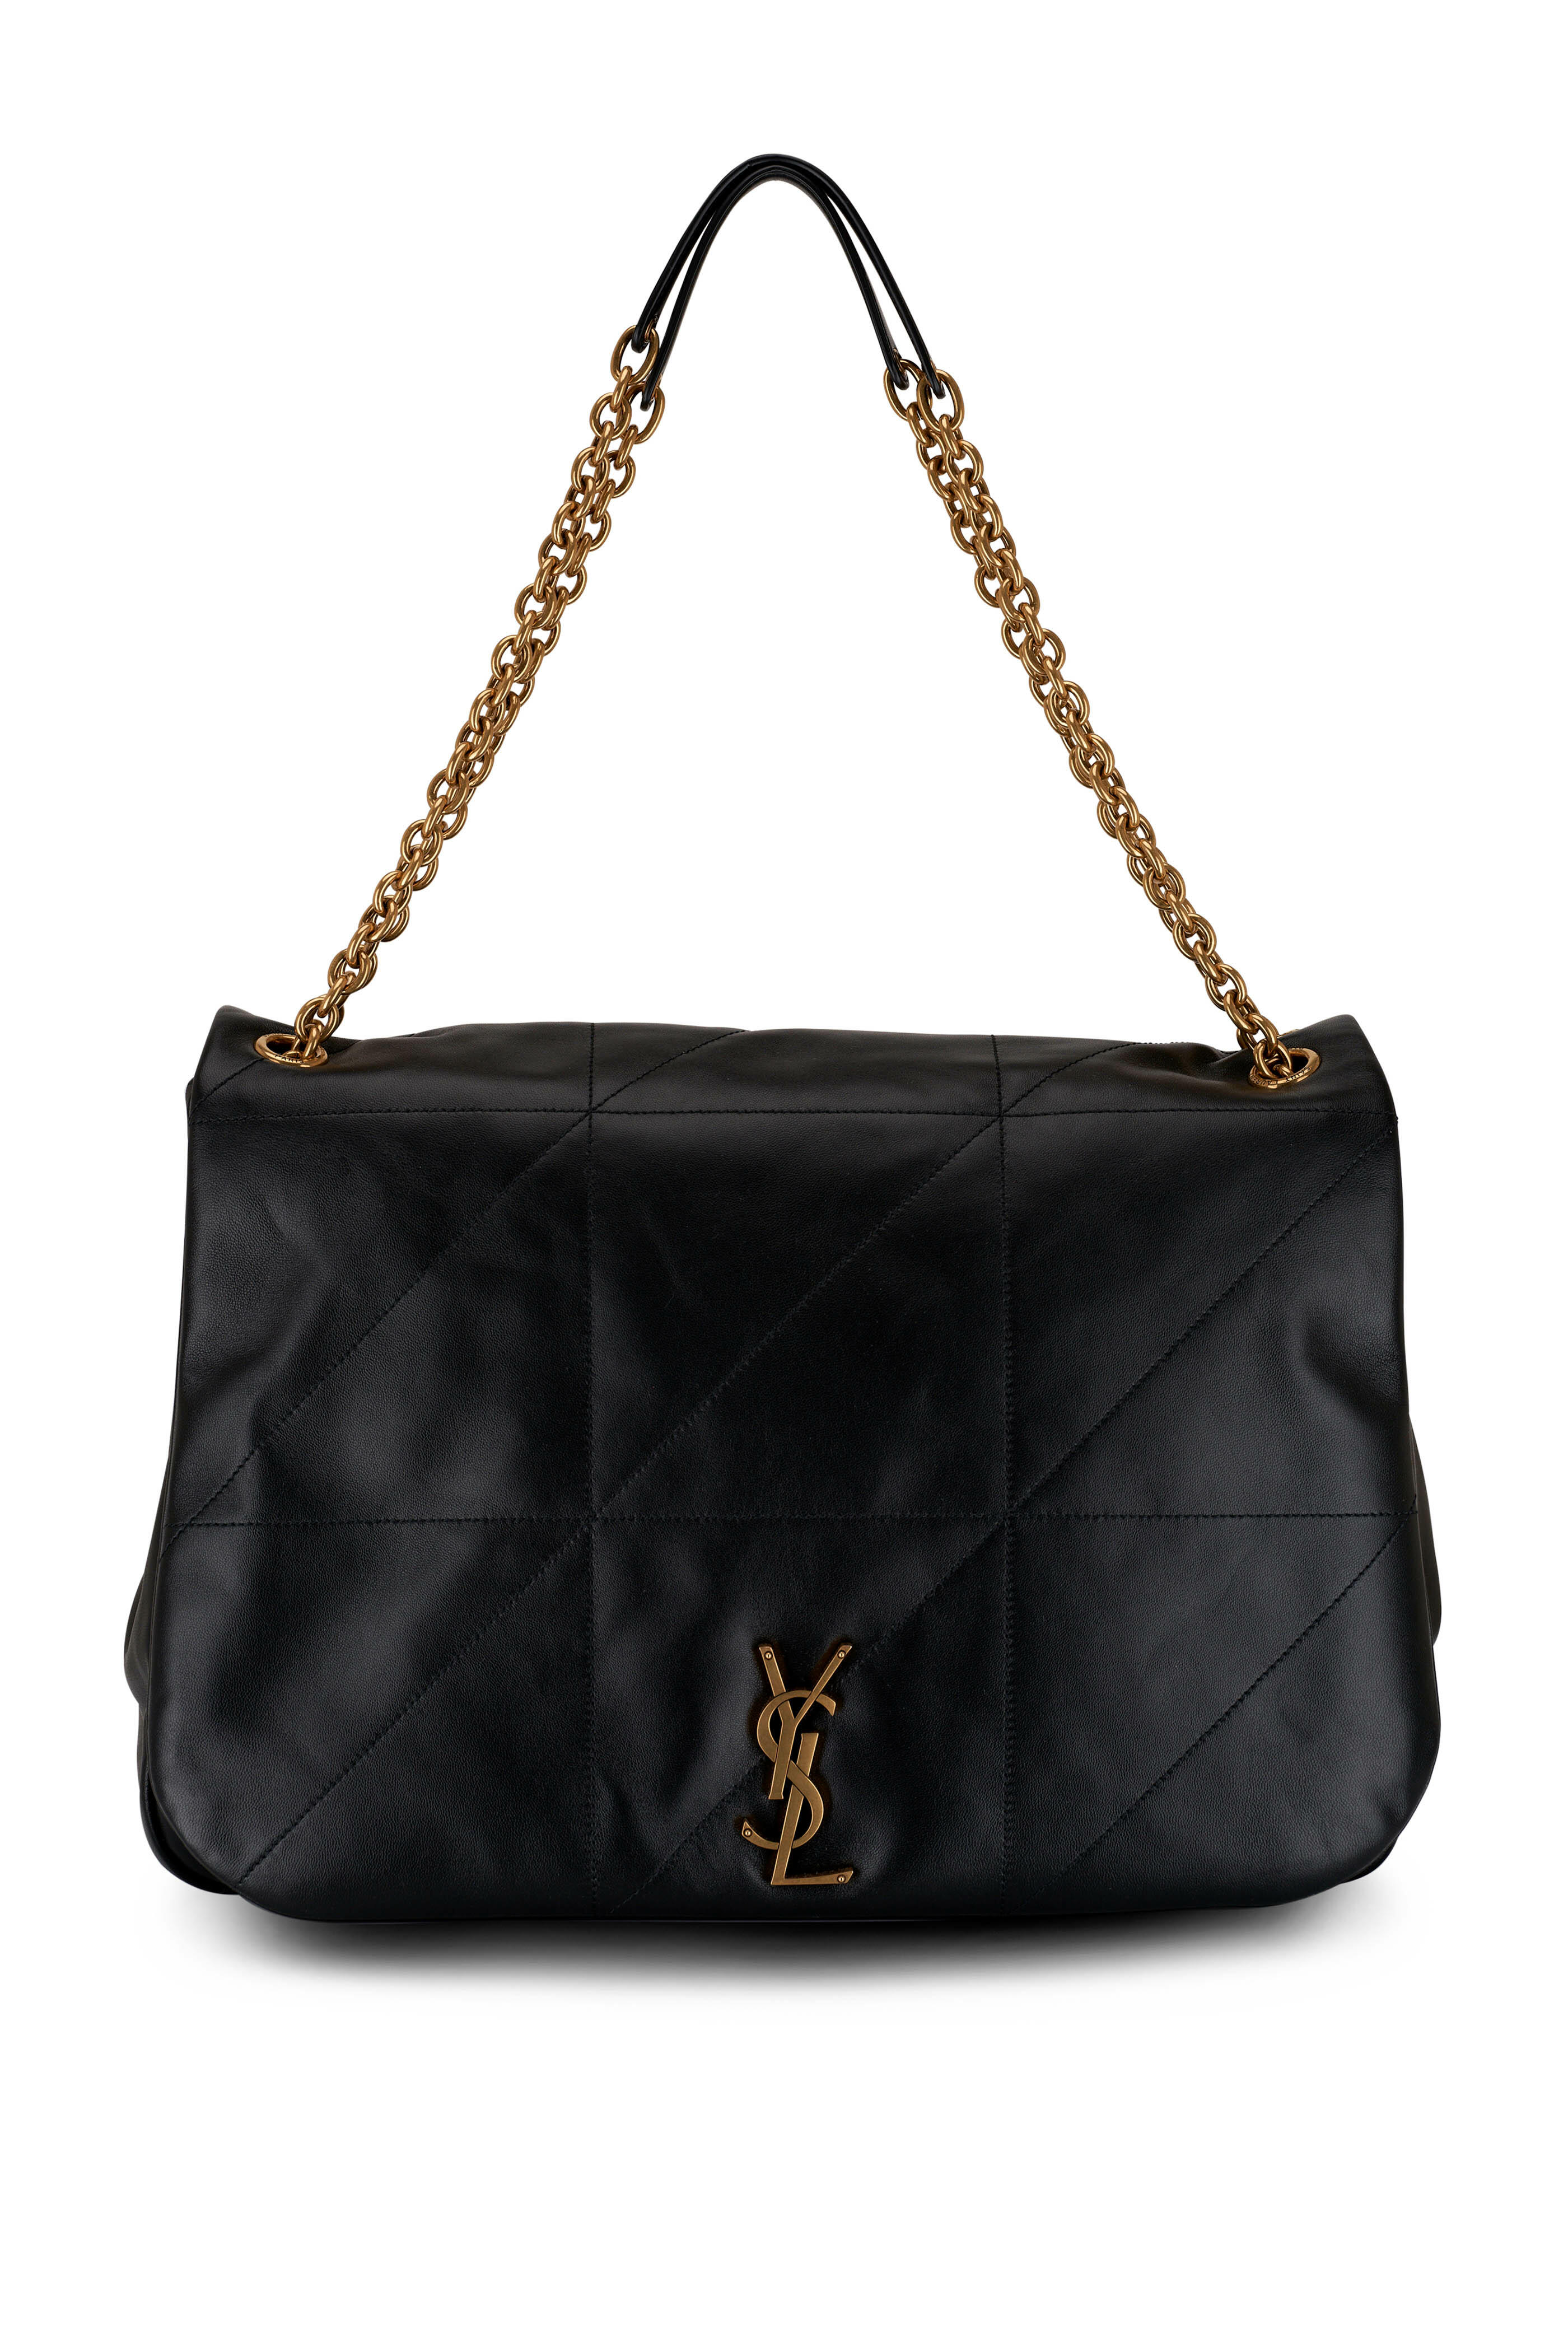 ENTIRE YSL HANDBAG COLLECTION - 11 BAGS TO SHARE 